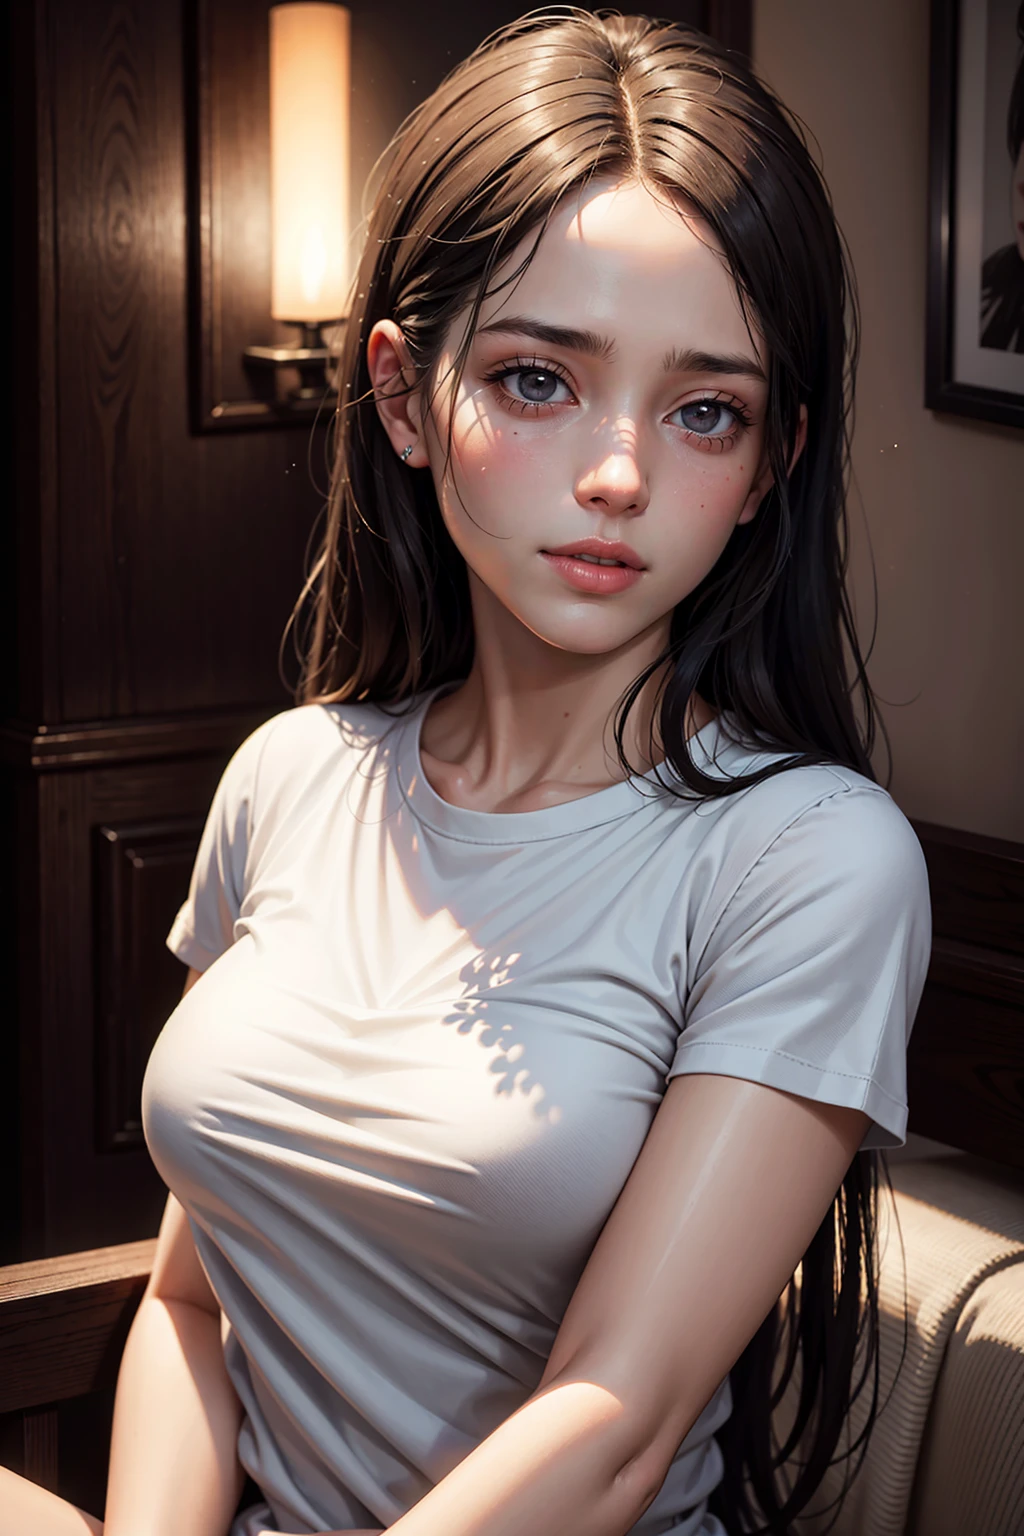 dressed, (photo realistic:1.4), (hyper realistic:1.4), (realistic:1.3), (smoother lighting:1.05), (increase cinematic lighting quality:0.9), 32K, 1girl,20yo girl, realistic lighting, backlighting, light on face, ray trace, (brightening light:1.2), (Increase quality:1.4), (best quality real texture skin), finely detailed eyes, finely detailed face, (tired and sleepy and satisfied:0.0), face closeup, t-shirts, (Increase body line mood:1.1), shiny skin